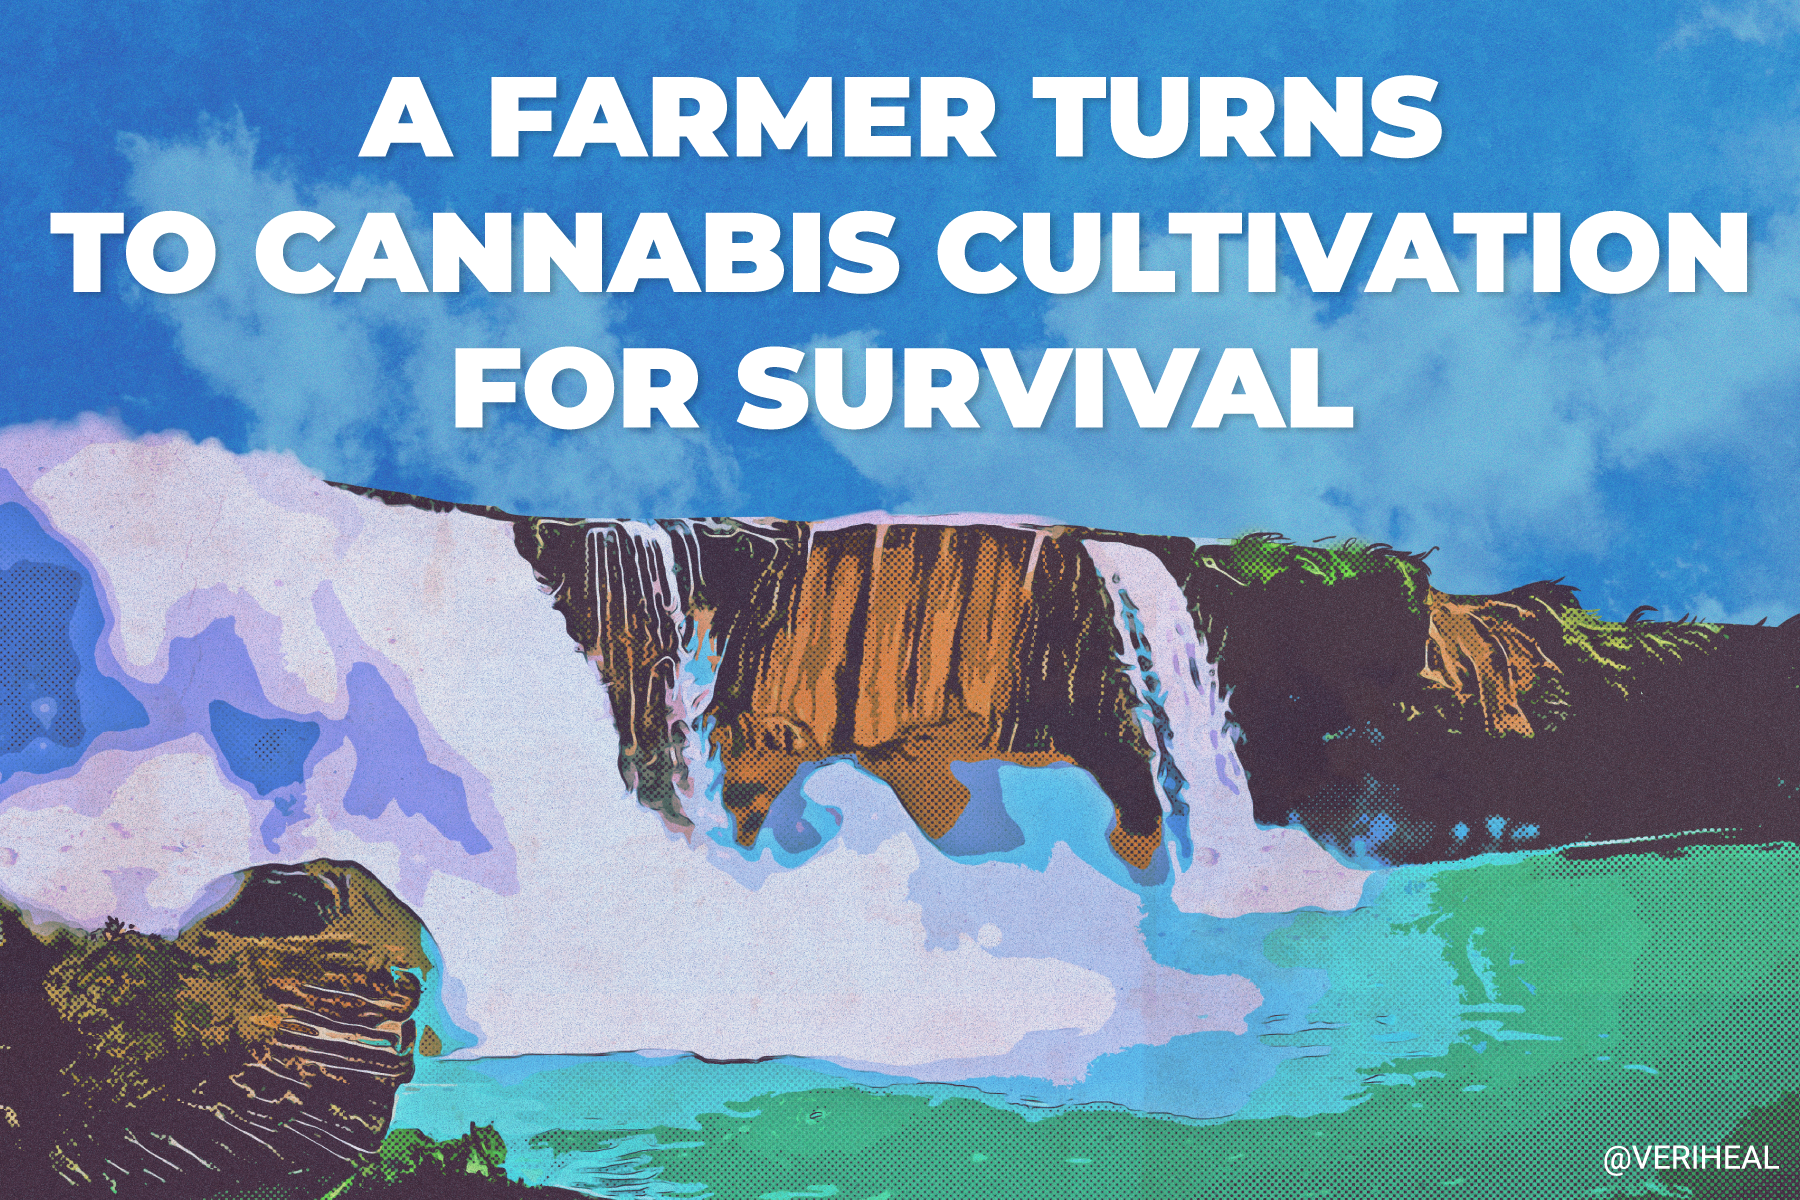 A Farmer Turns to Cannabis Cultivation for Survival